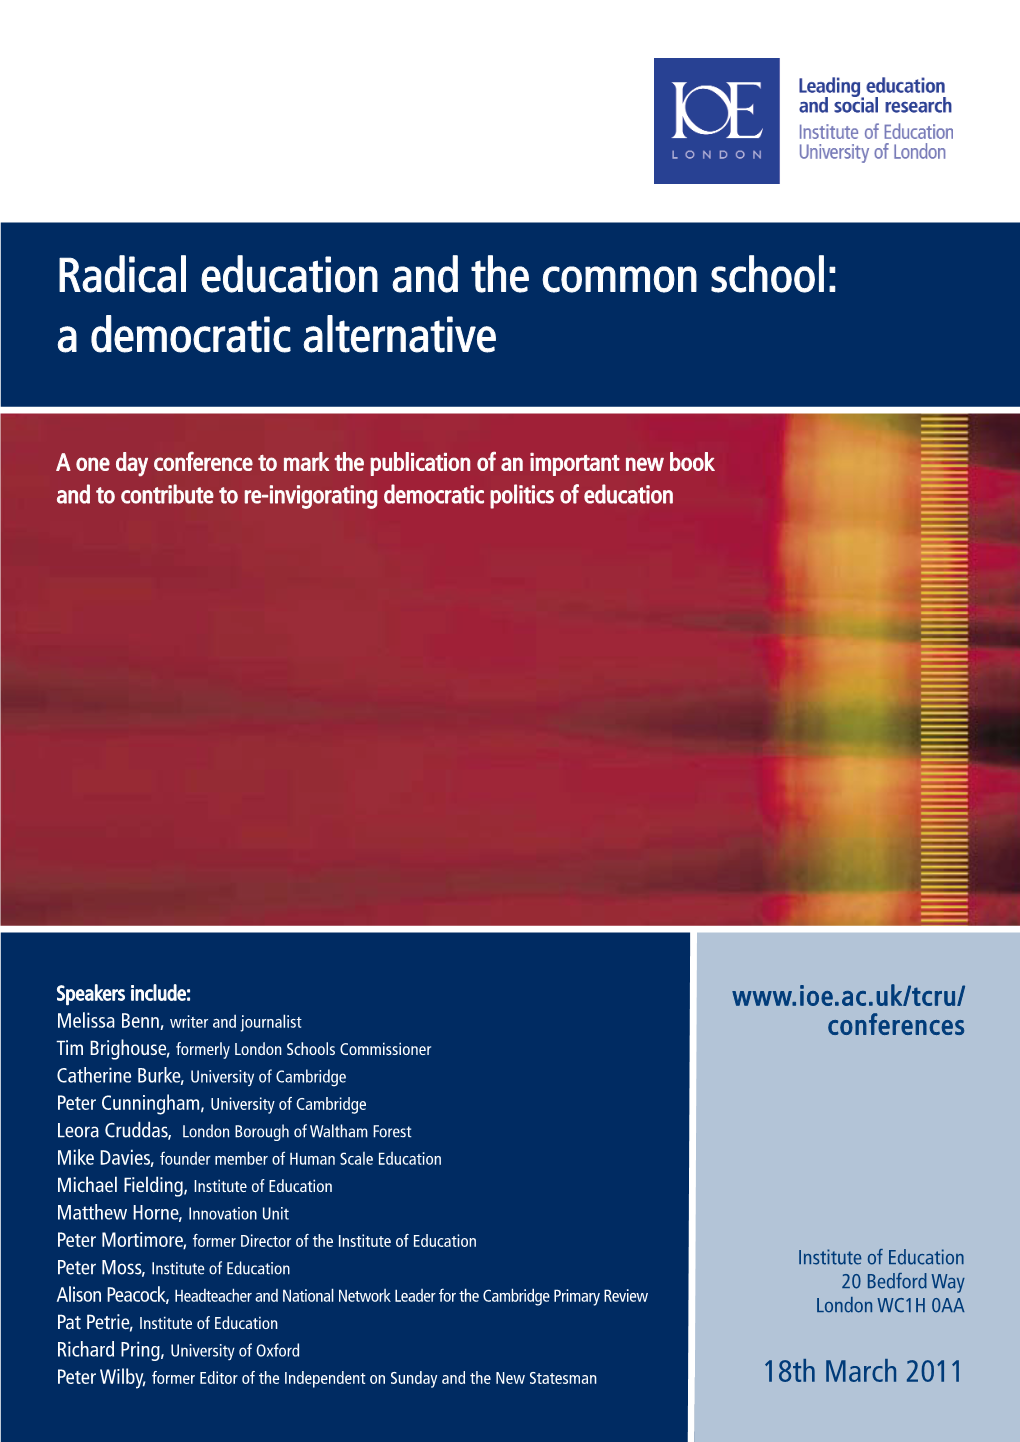 Radical Education Conference Flier Yippee Flyer